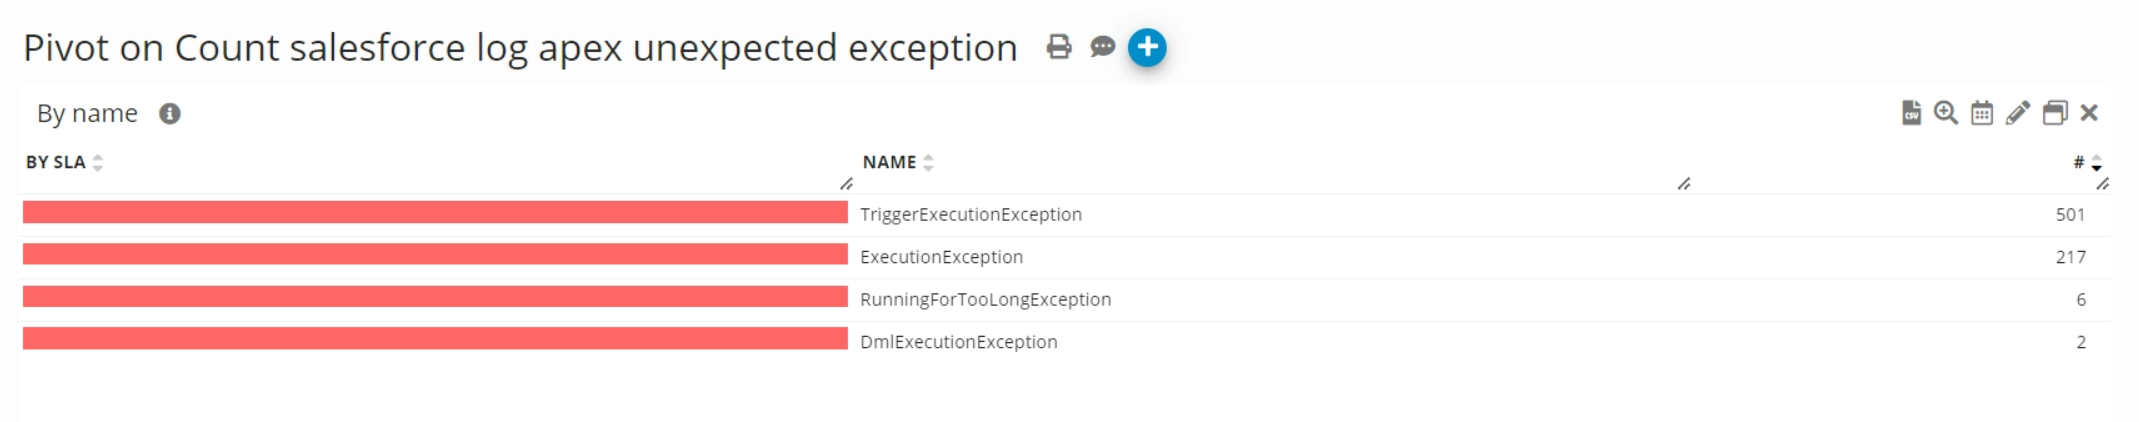 Salesforce Apex Unexpected Exception by type